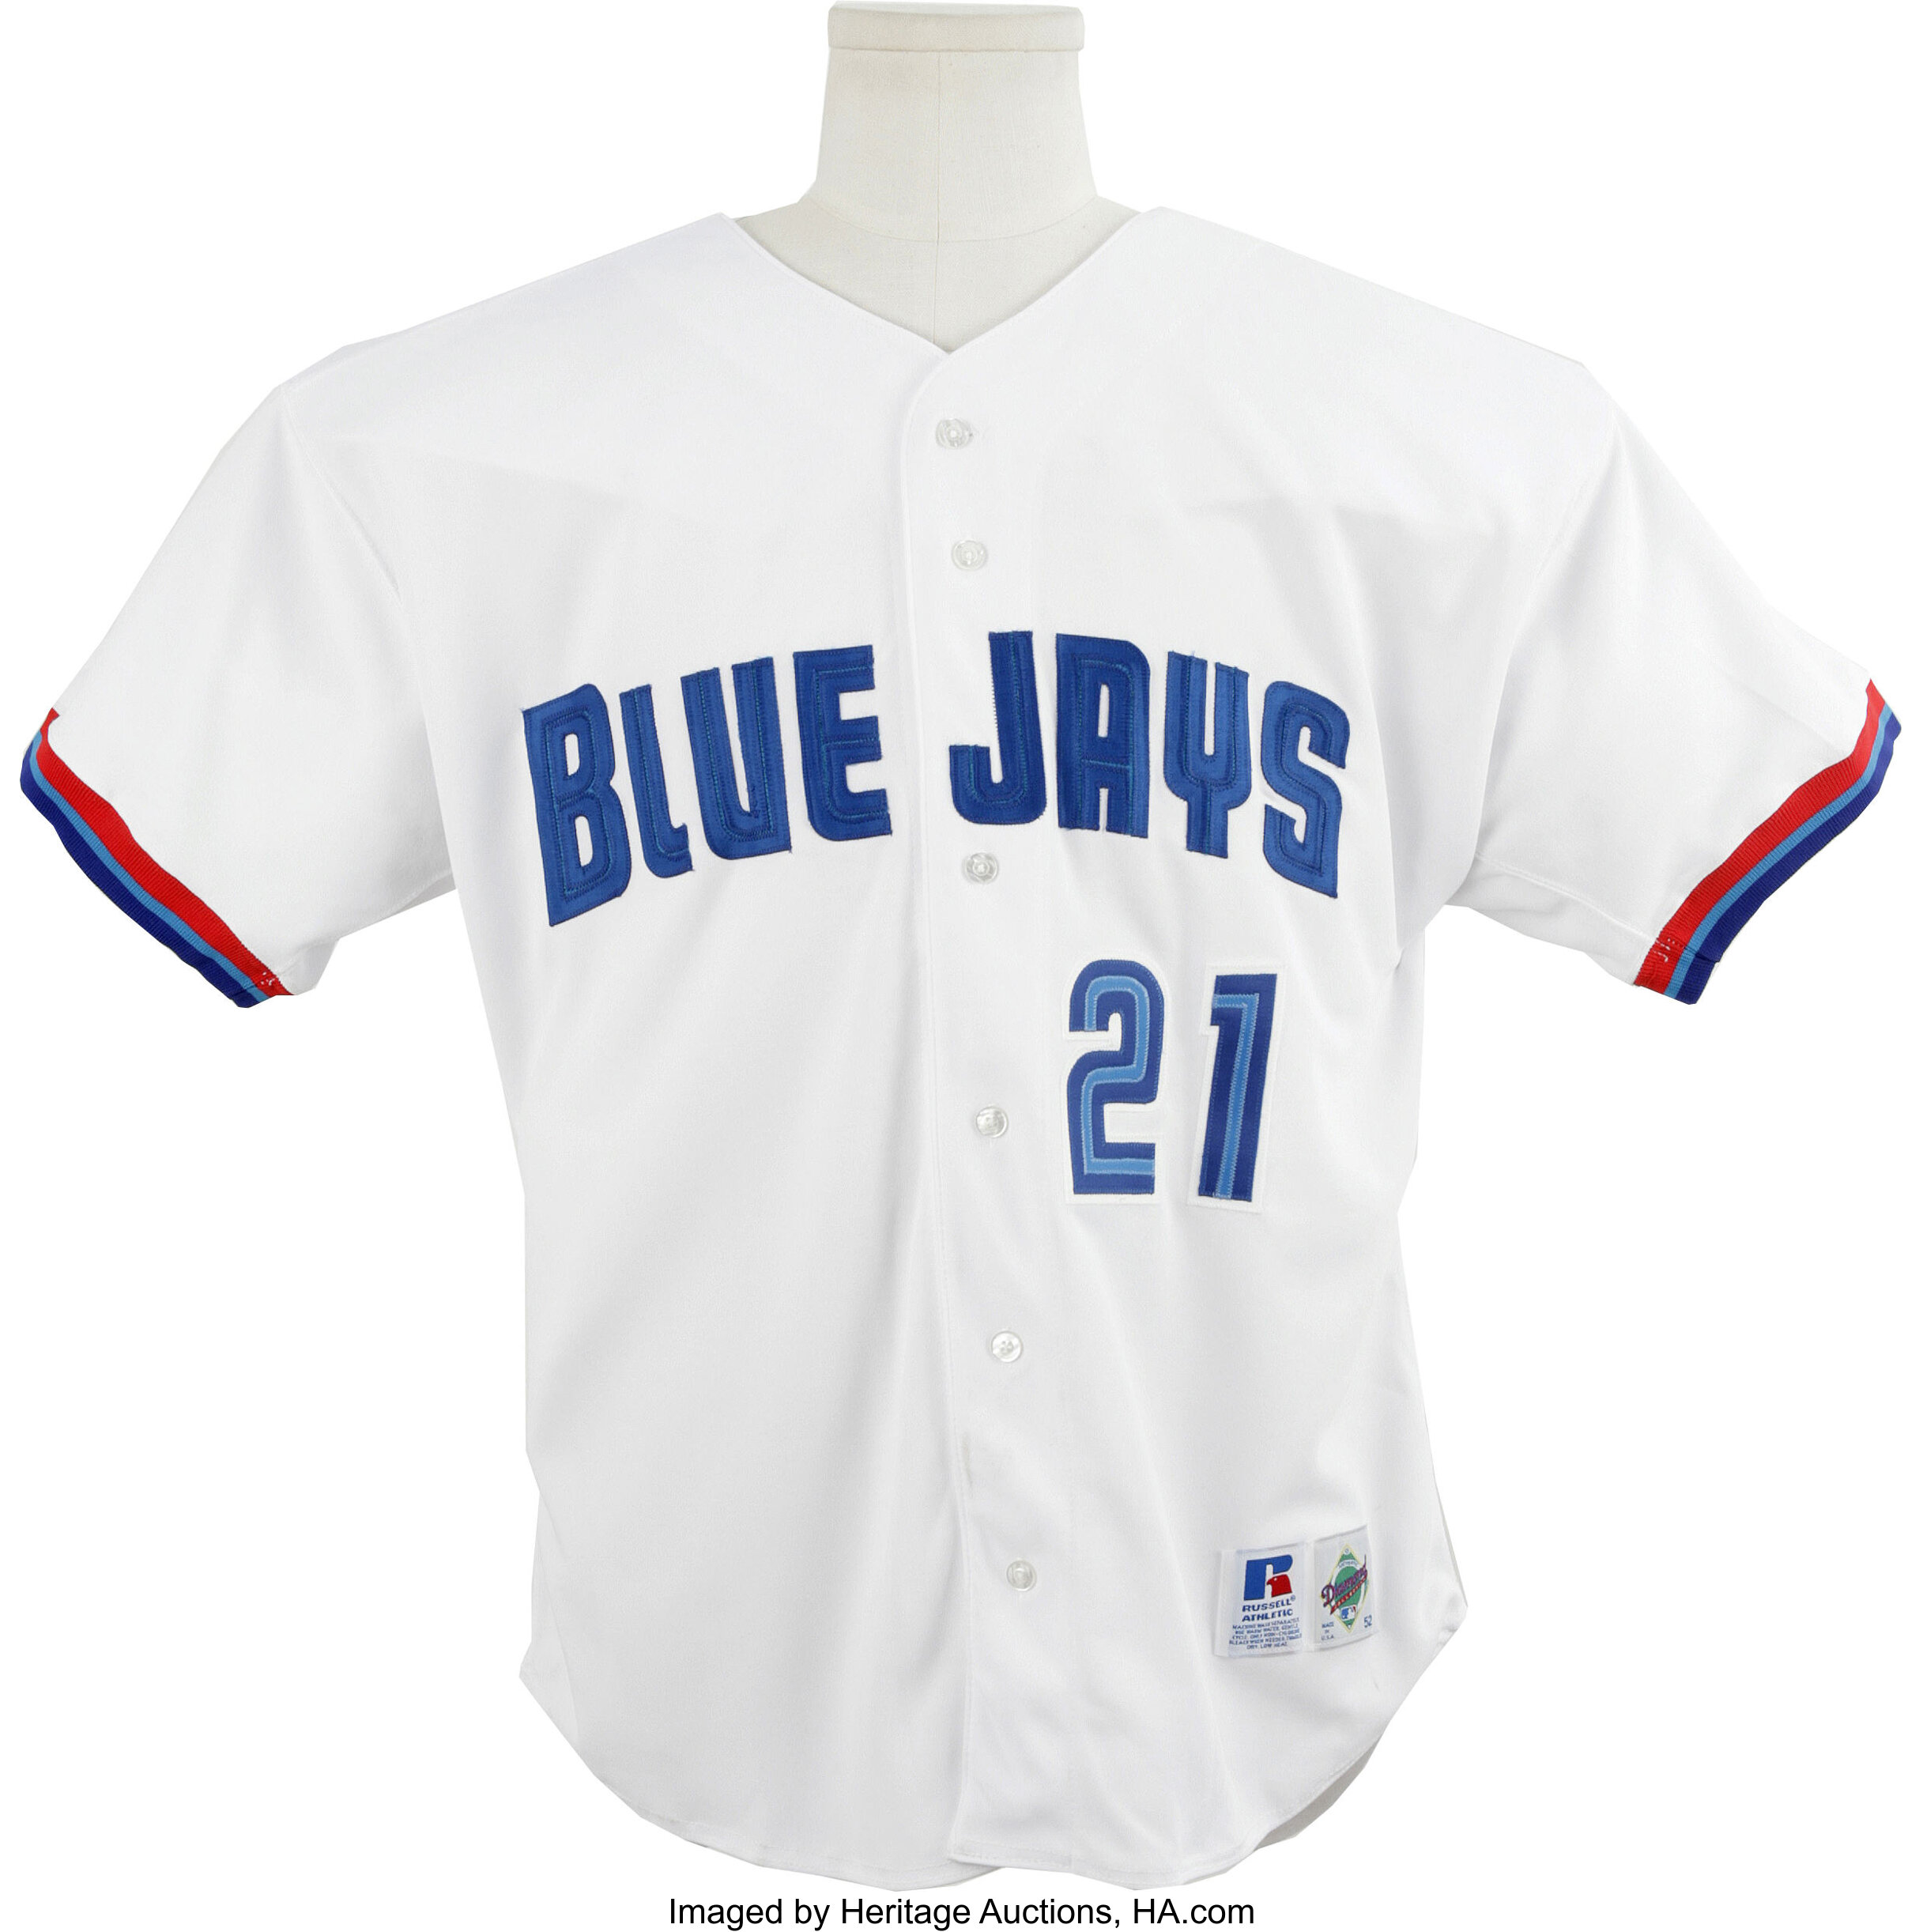 MLB Toronto Blue Jays Roger Clemens 31 Jersey Embroidered 